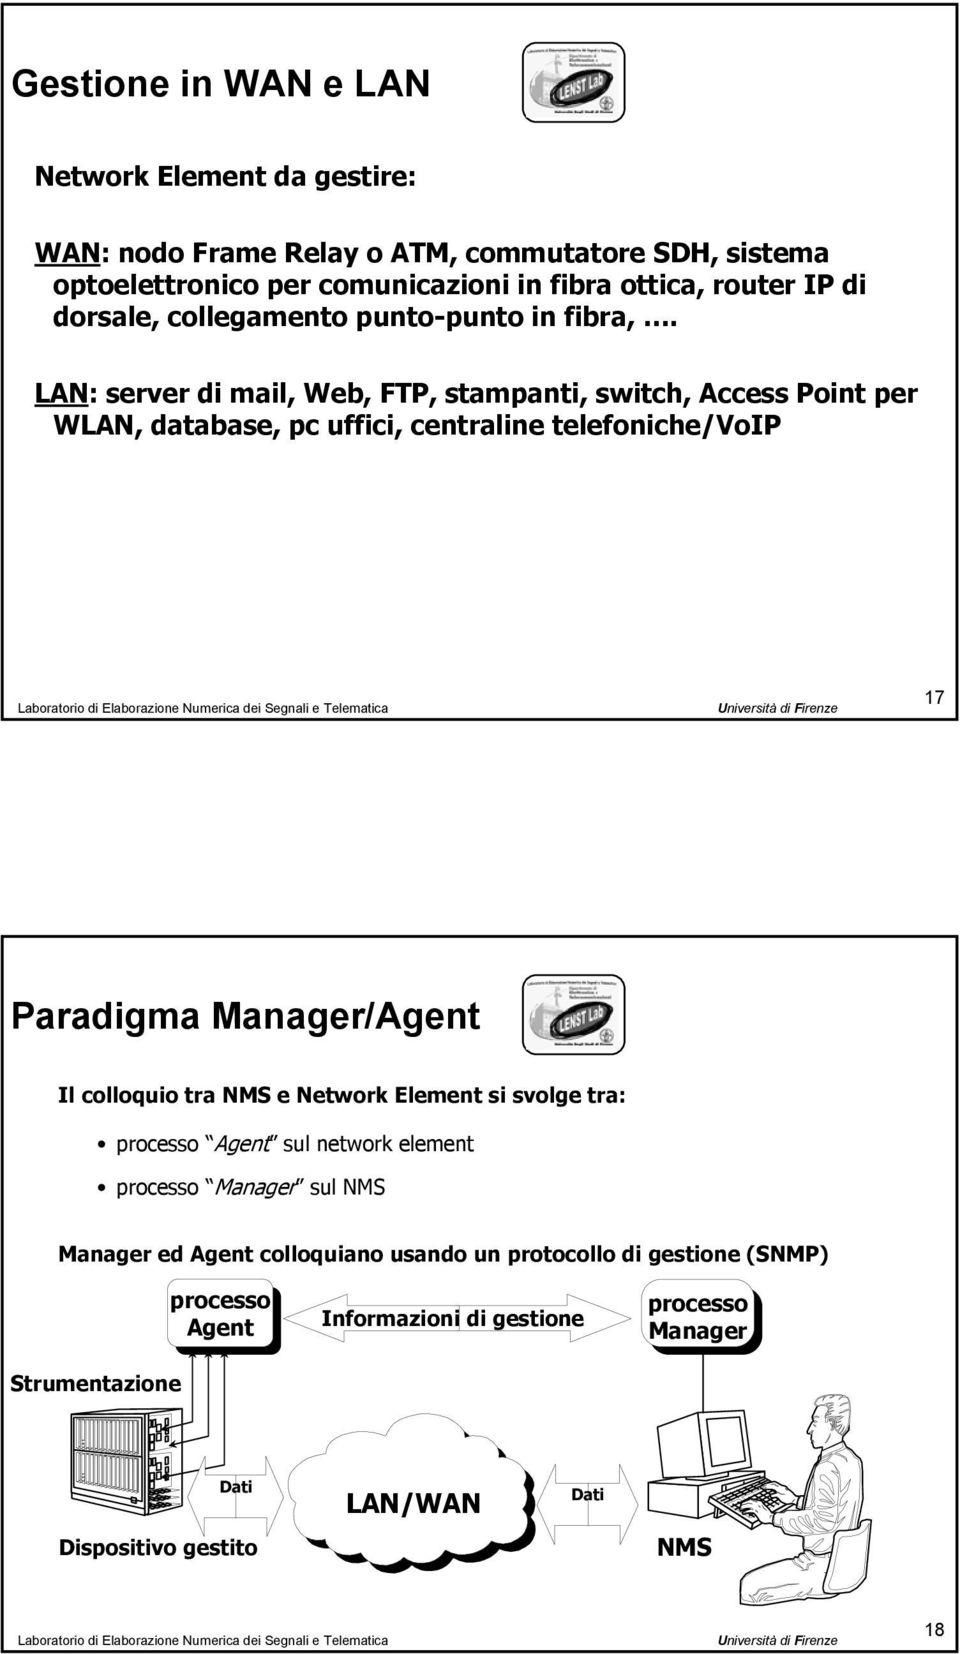 LAN: server di mail, Web, FTP, stampanti, switch, Access Point per WLAN, database, pc uffici, centraline telefoniche/voip 17 Paradigma Manager/Agent Il colloquio tra